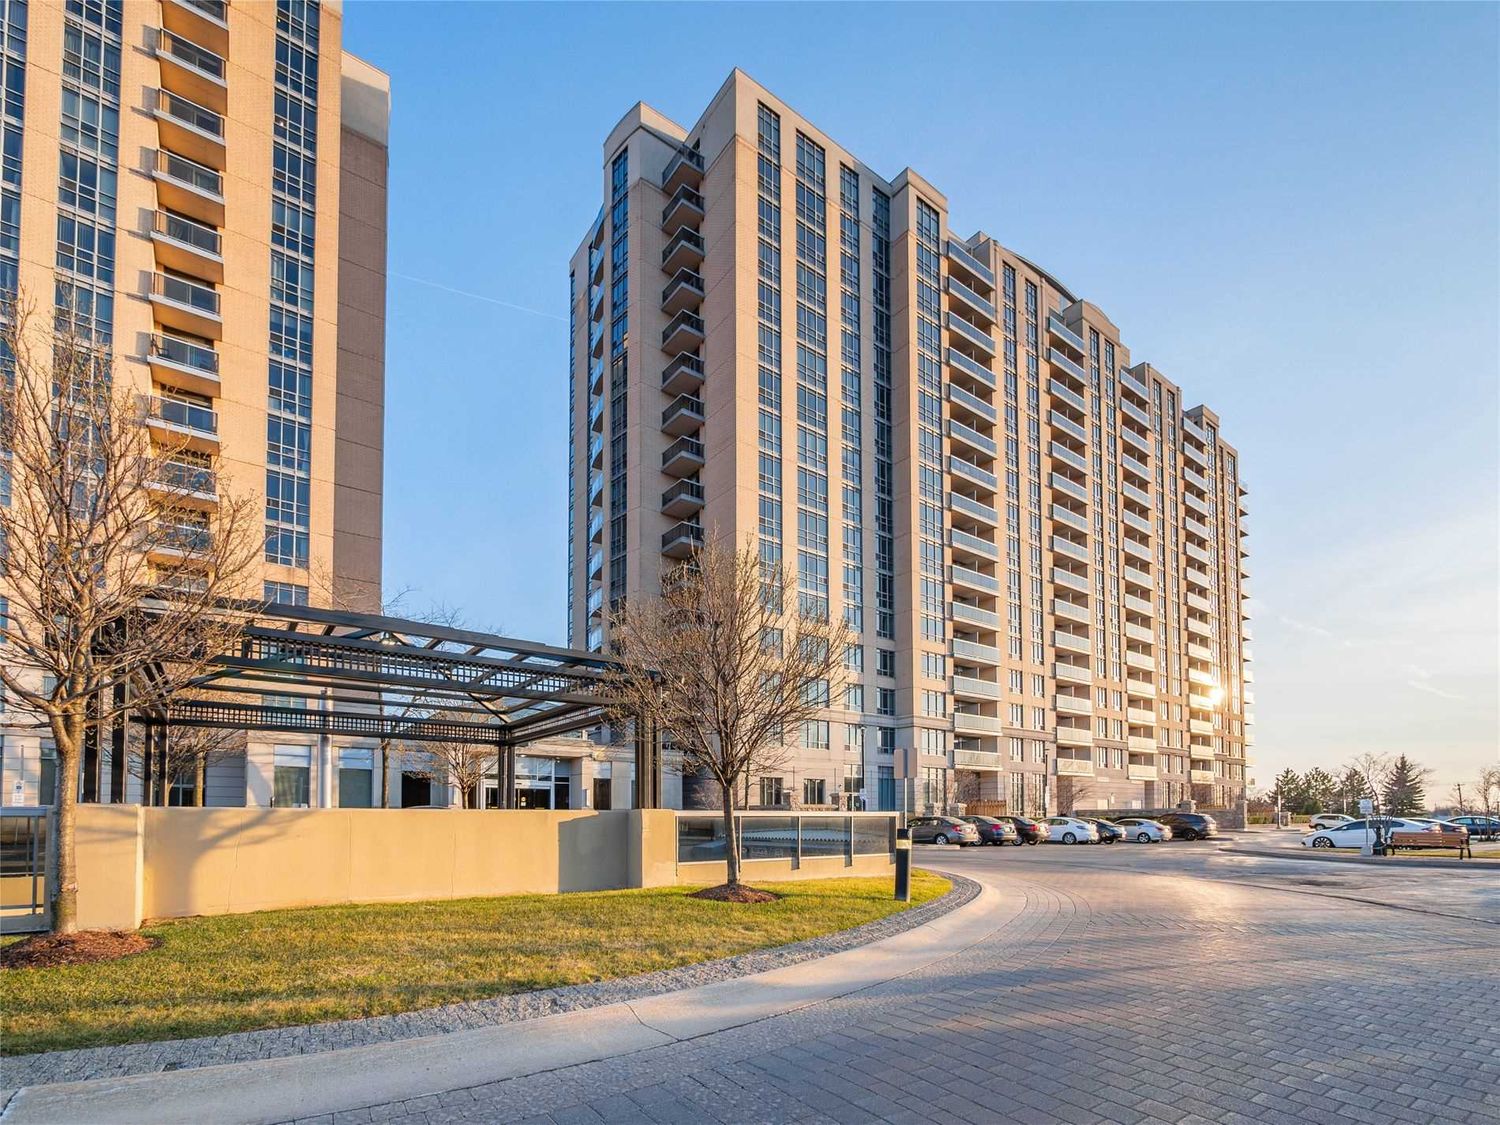 18 Mondeo Drive. Mondeo Springs II Condos is located in  Scarborough, Toronto - image #1 of 2